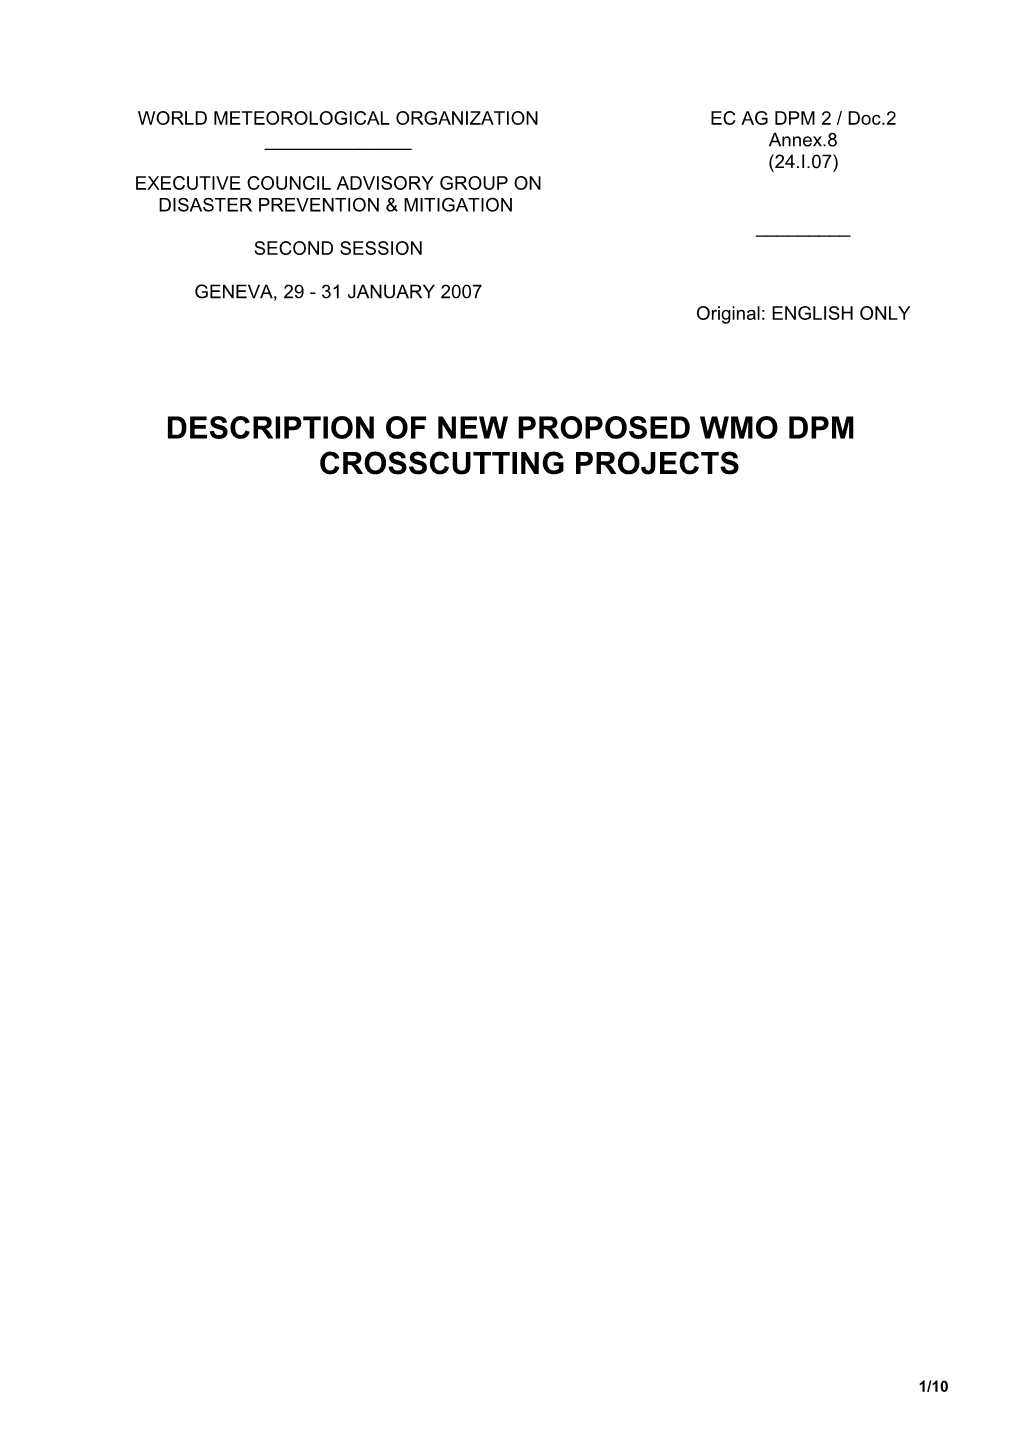 Description of New Proposed WMO DPM Crosscutting Projects